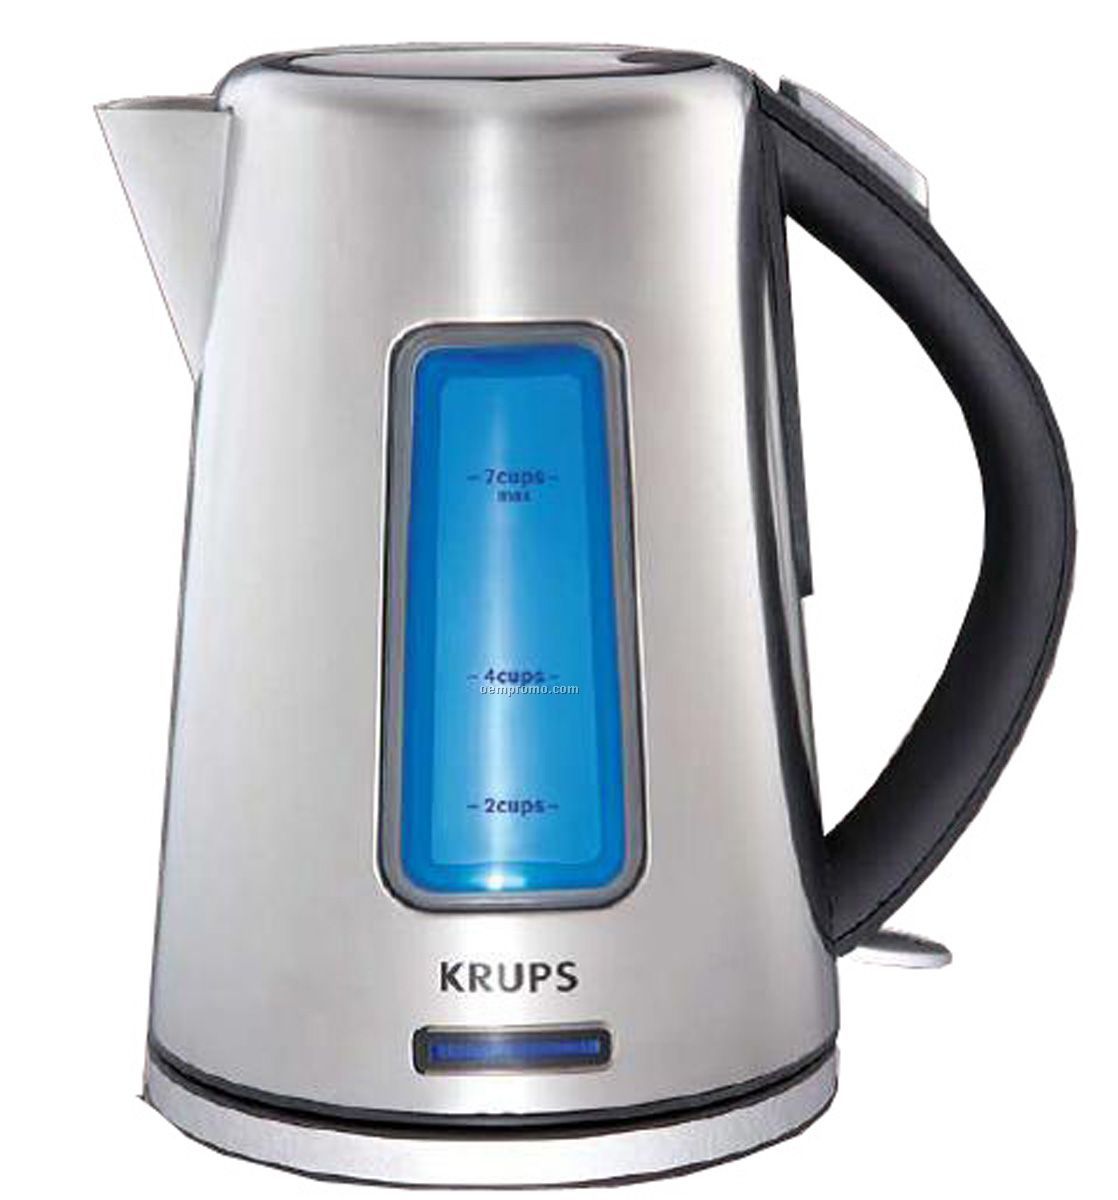 Krups Intuitive Stainless Steel Kettle